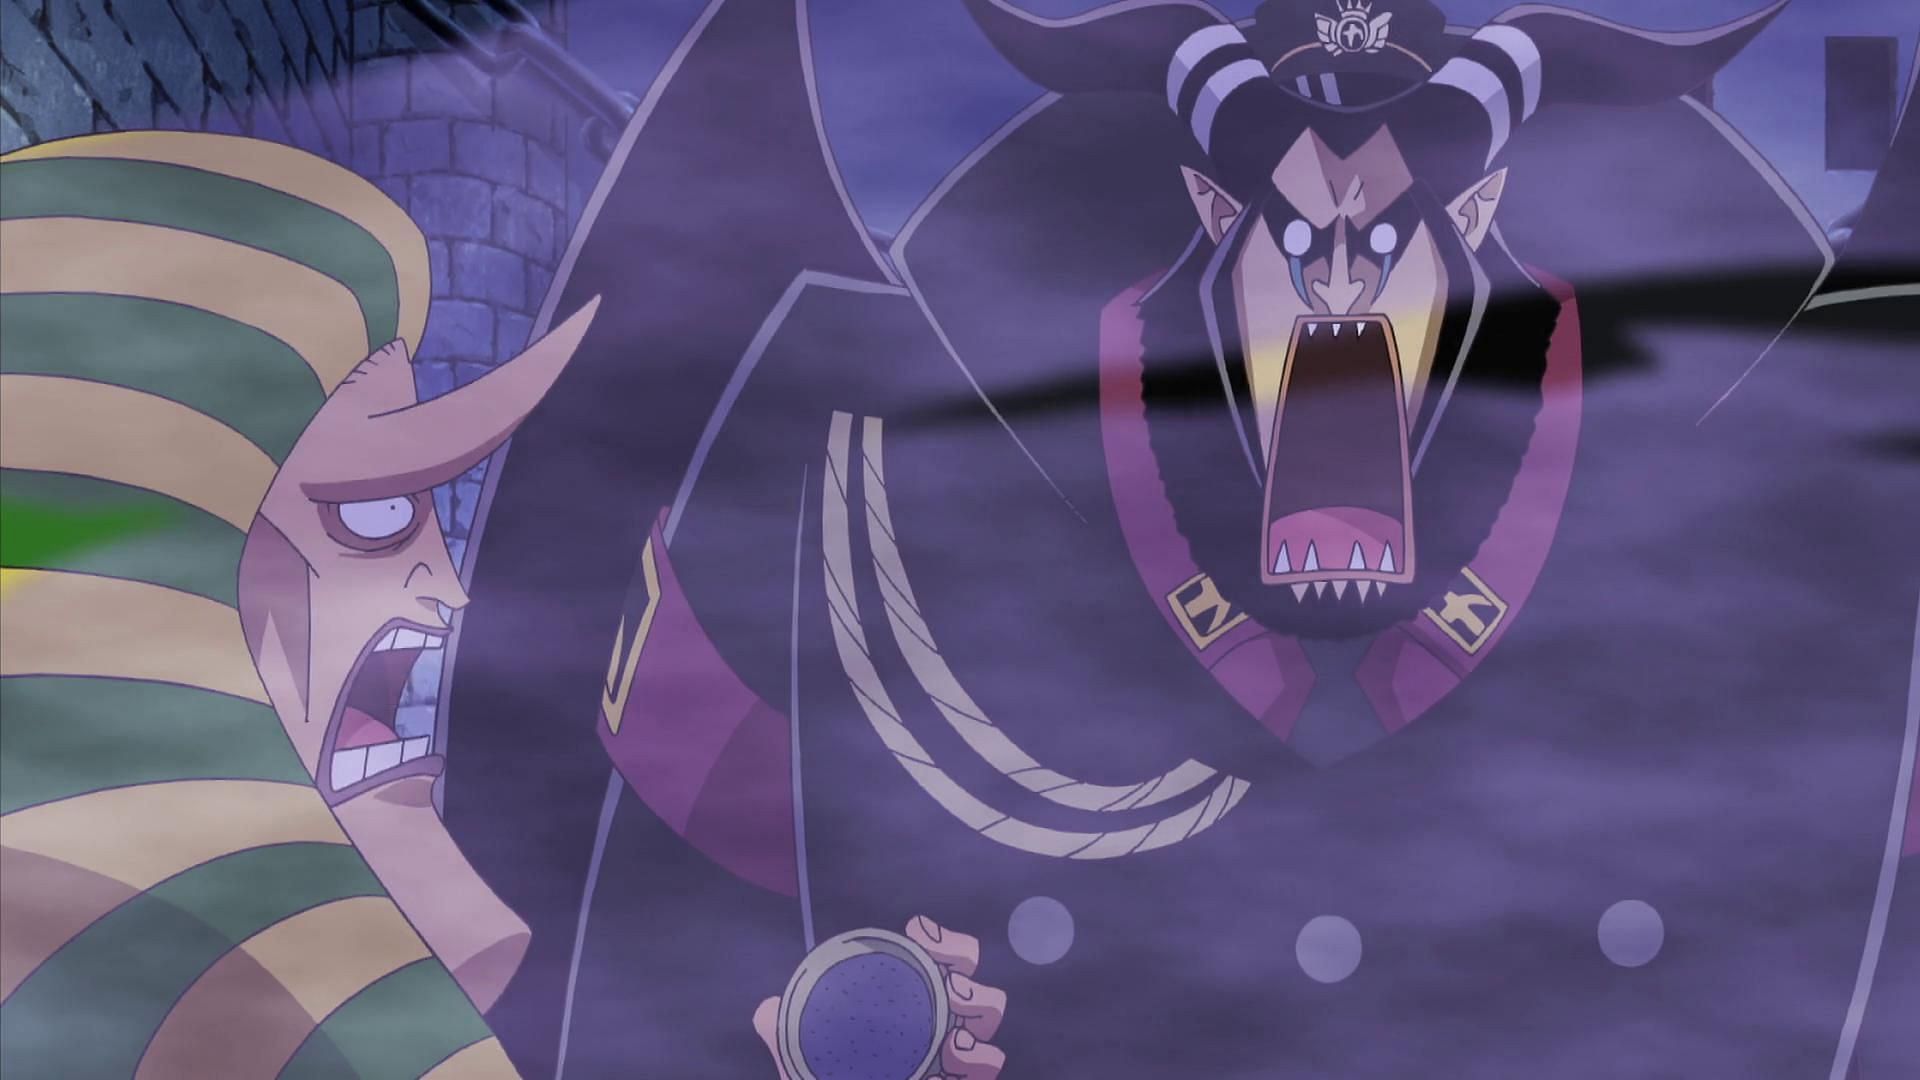 Hannyabal and Magellan as seen in One Piece (Image via Toei Animation)